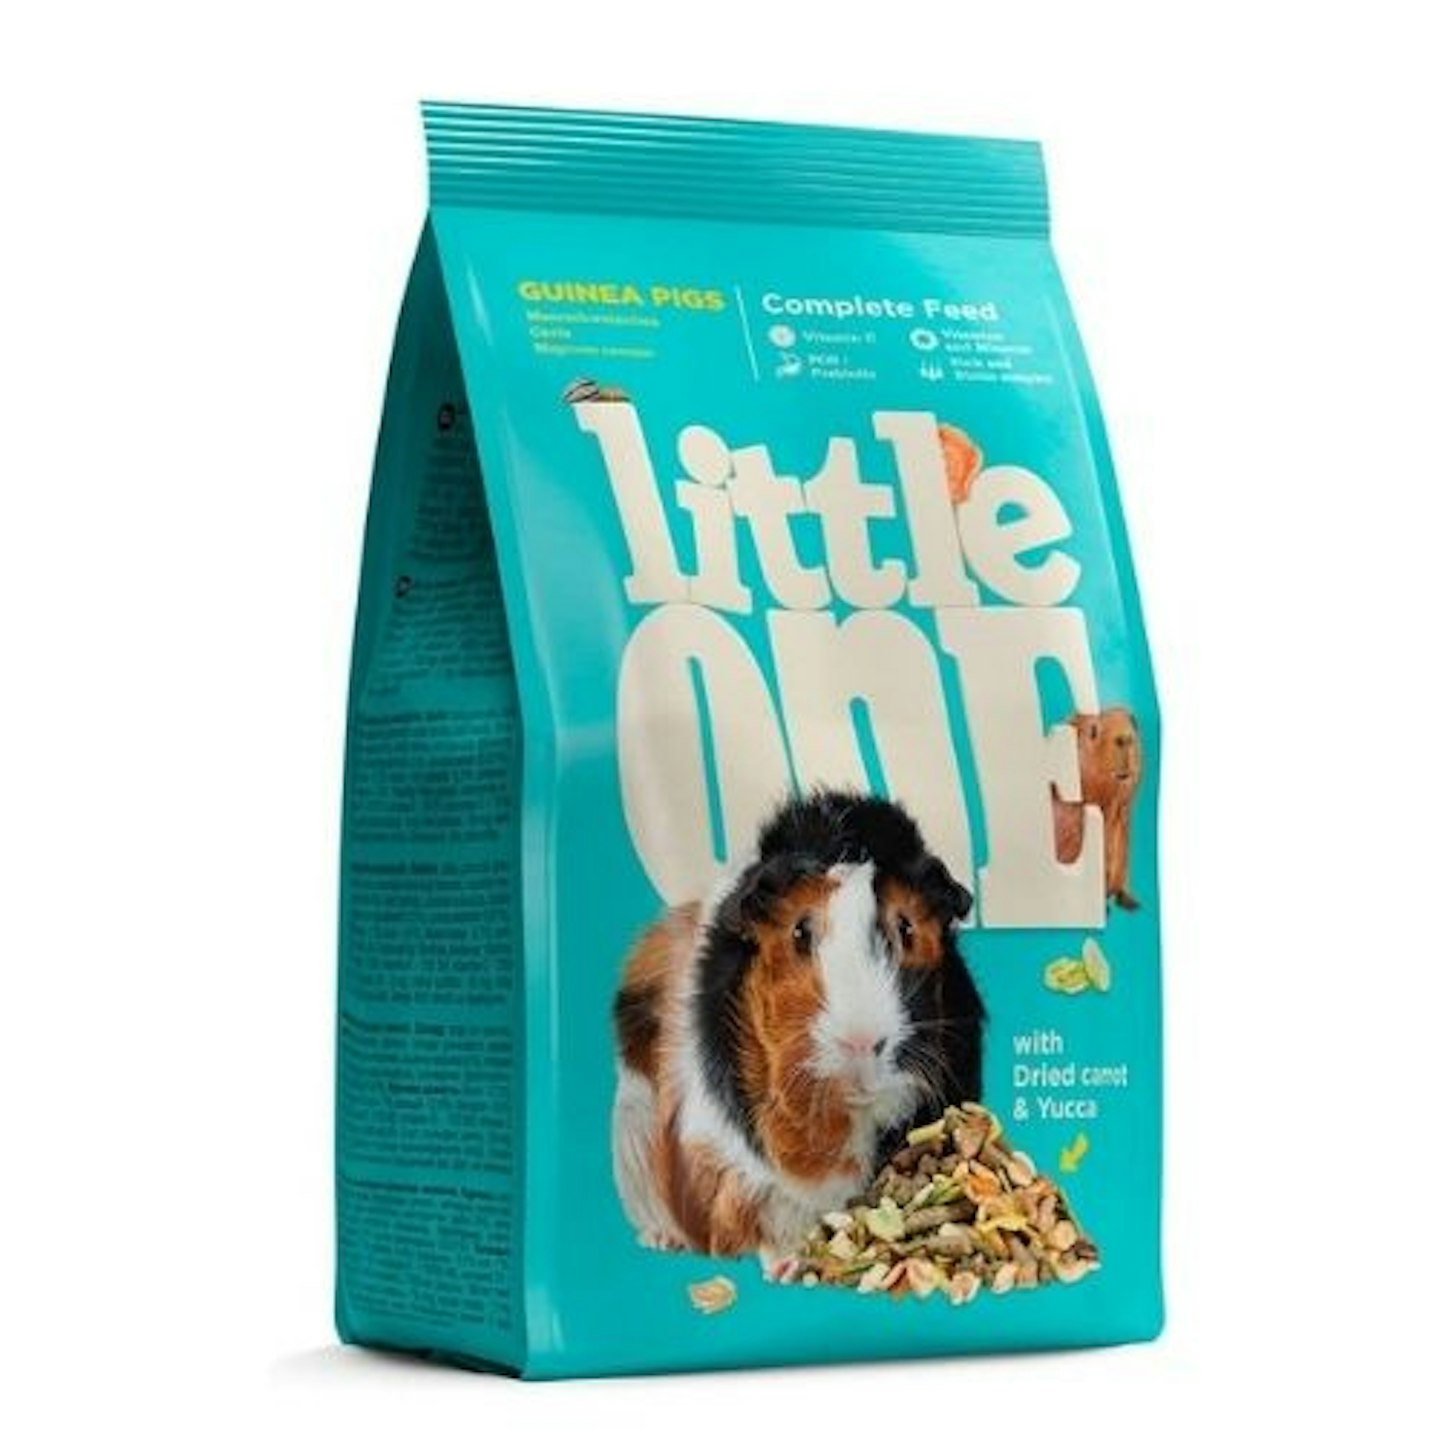 Little One Food for Guinea Pigs (900g)